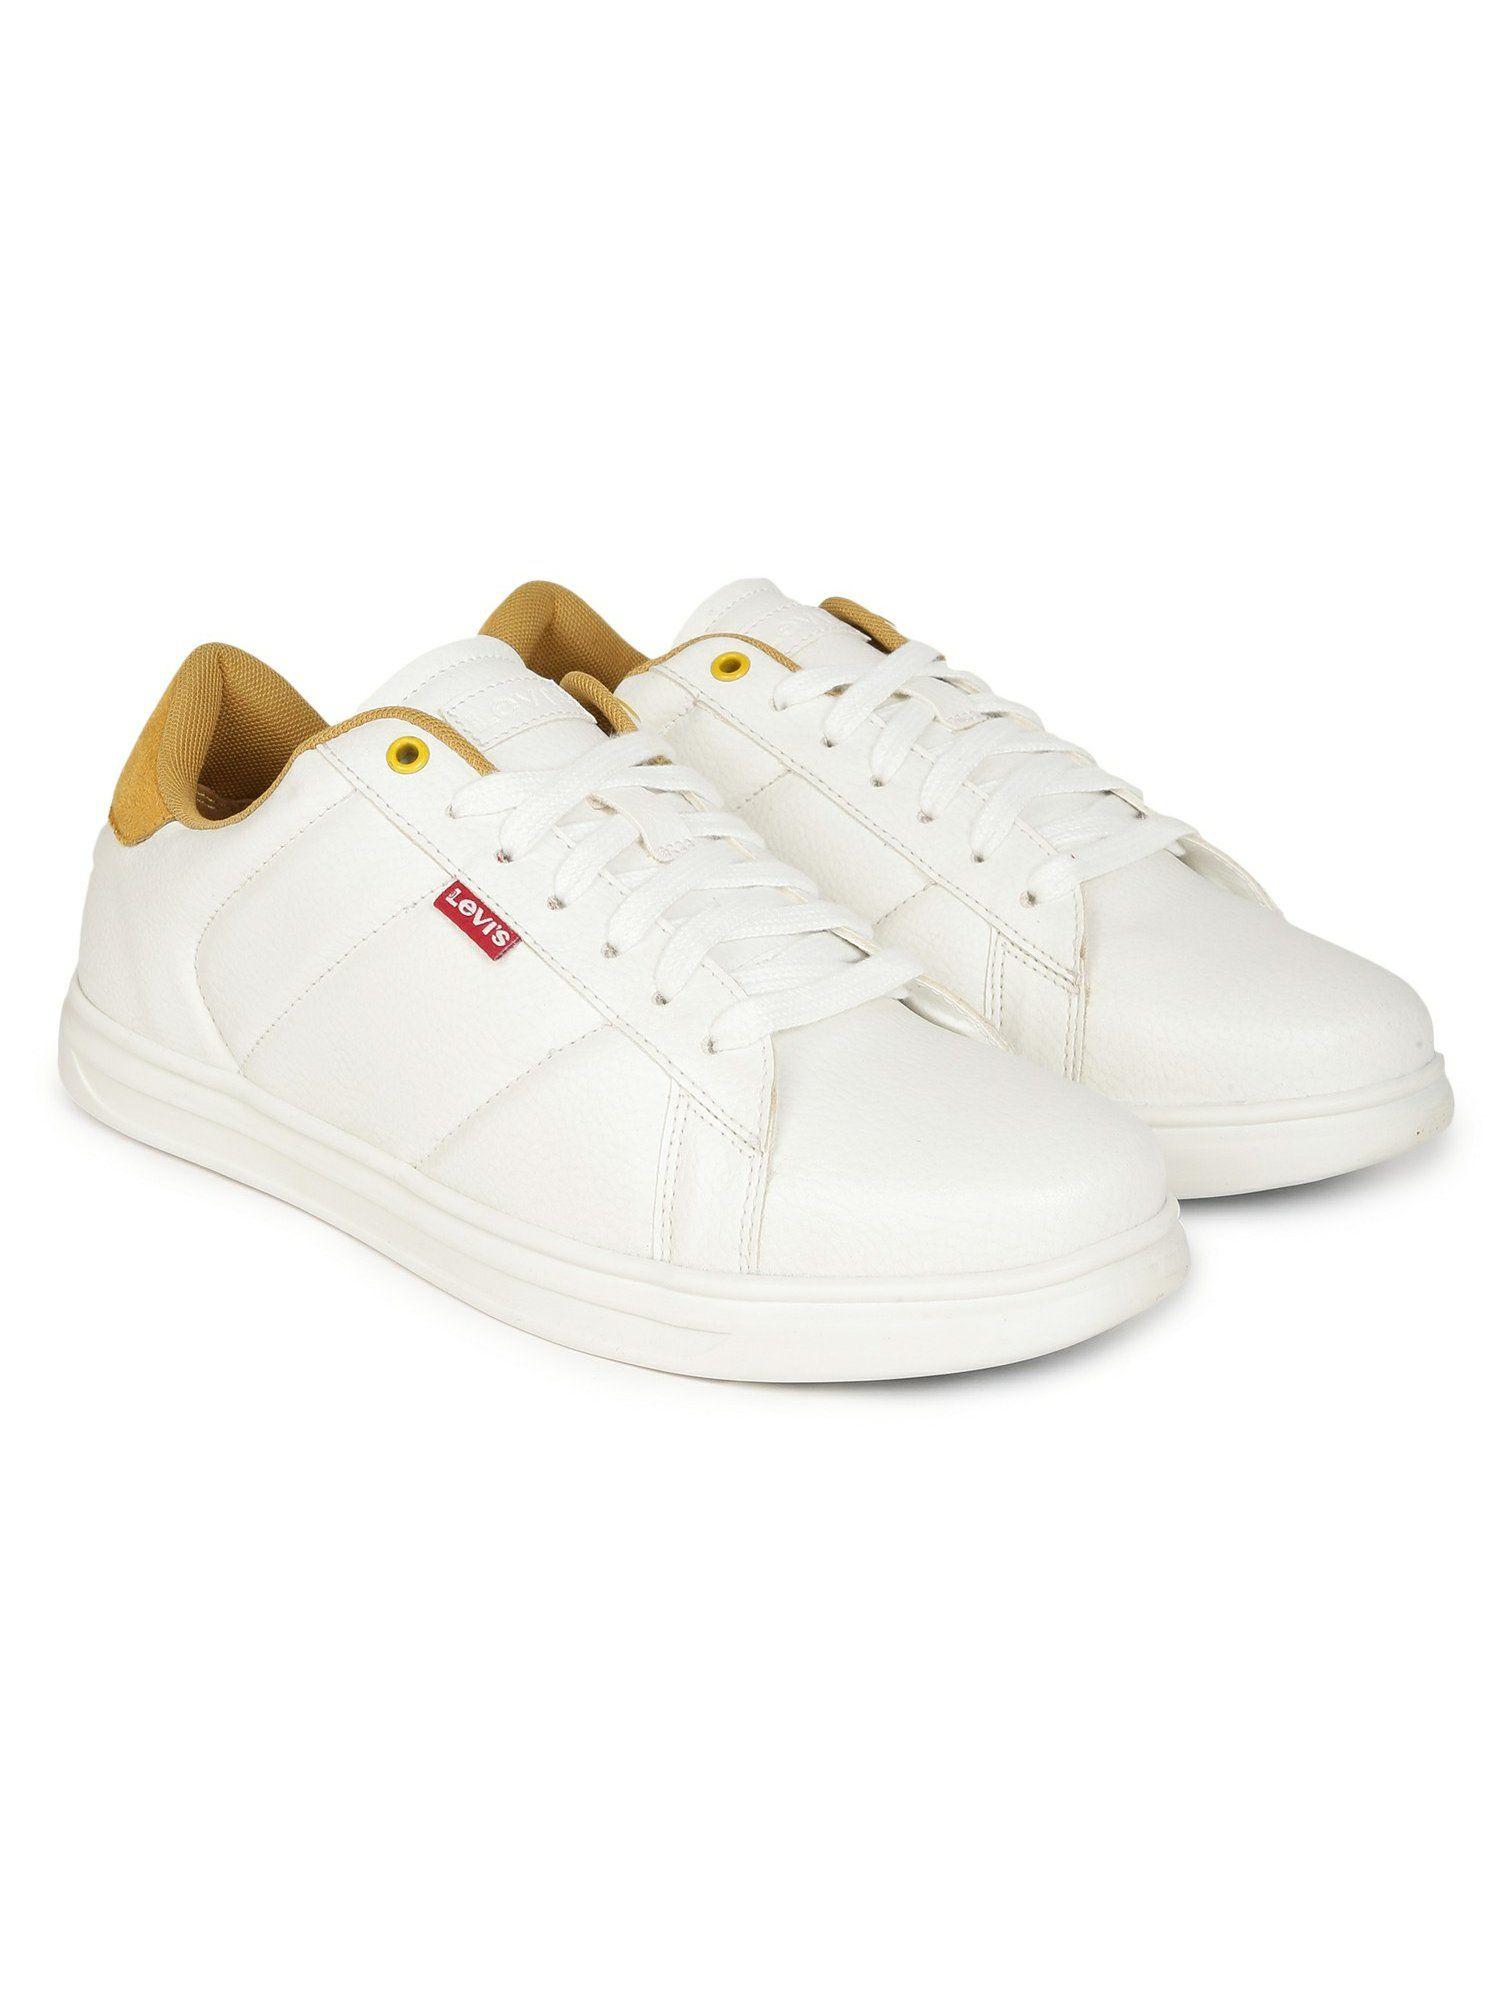 men white and yellow sneakers